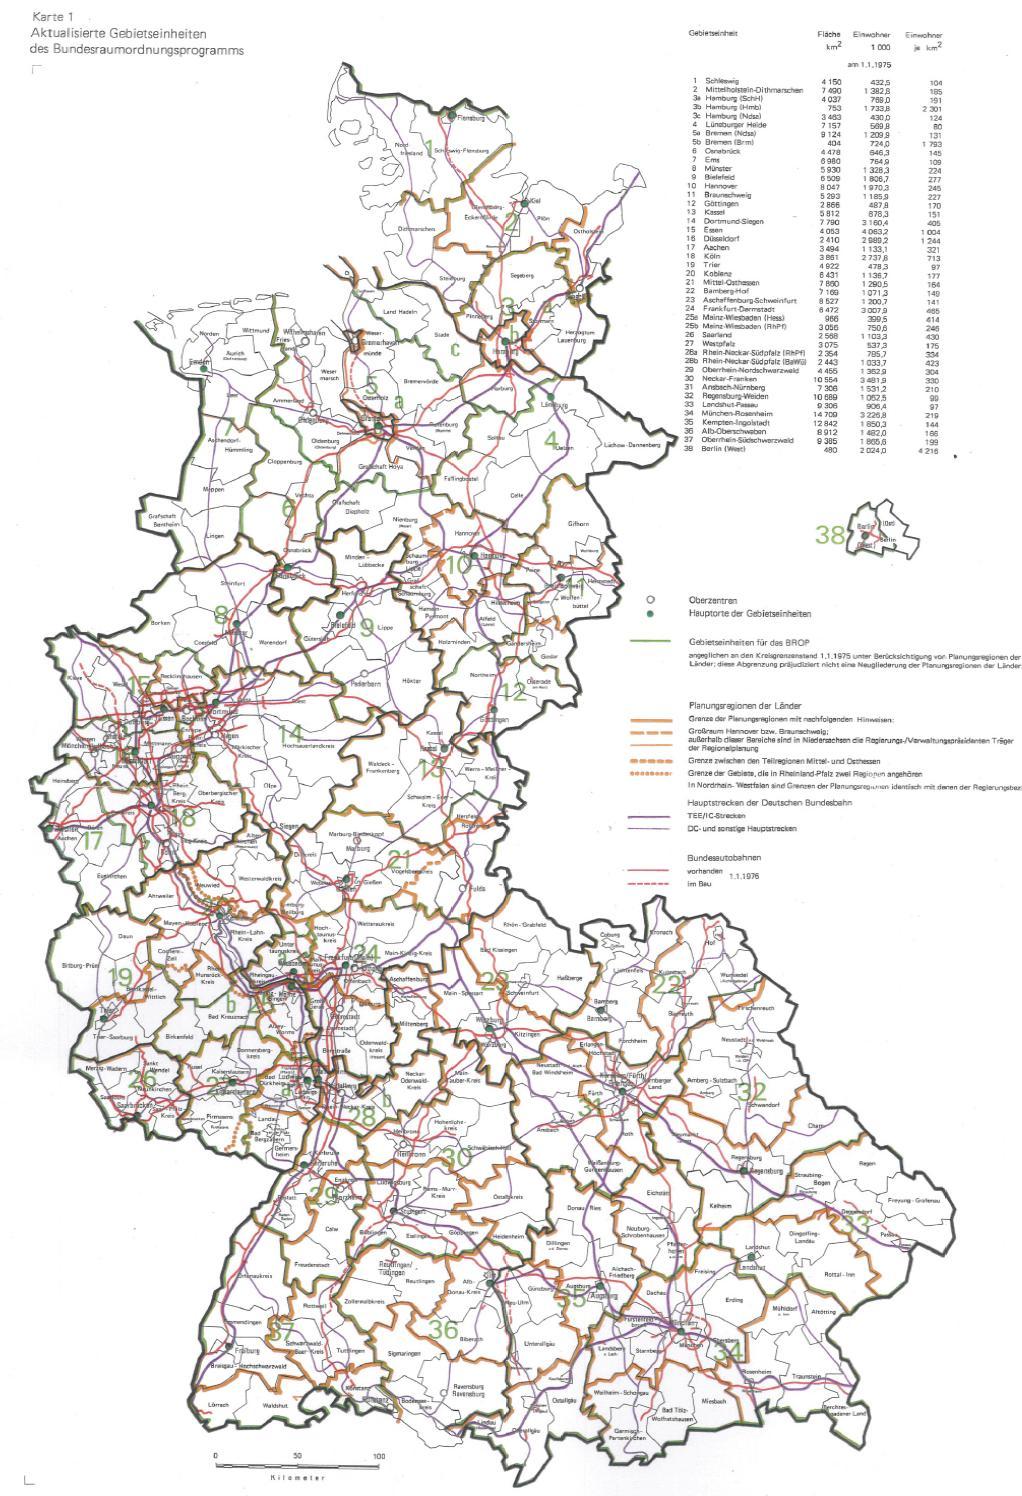 Figure 2: Map of Raumordnungsregionen (RORs or Cities) in Former West Germany Source: Federal Office for Building and Regional